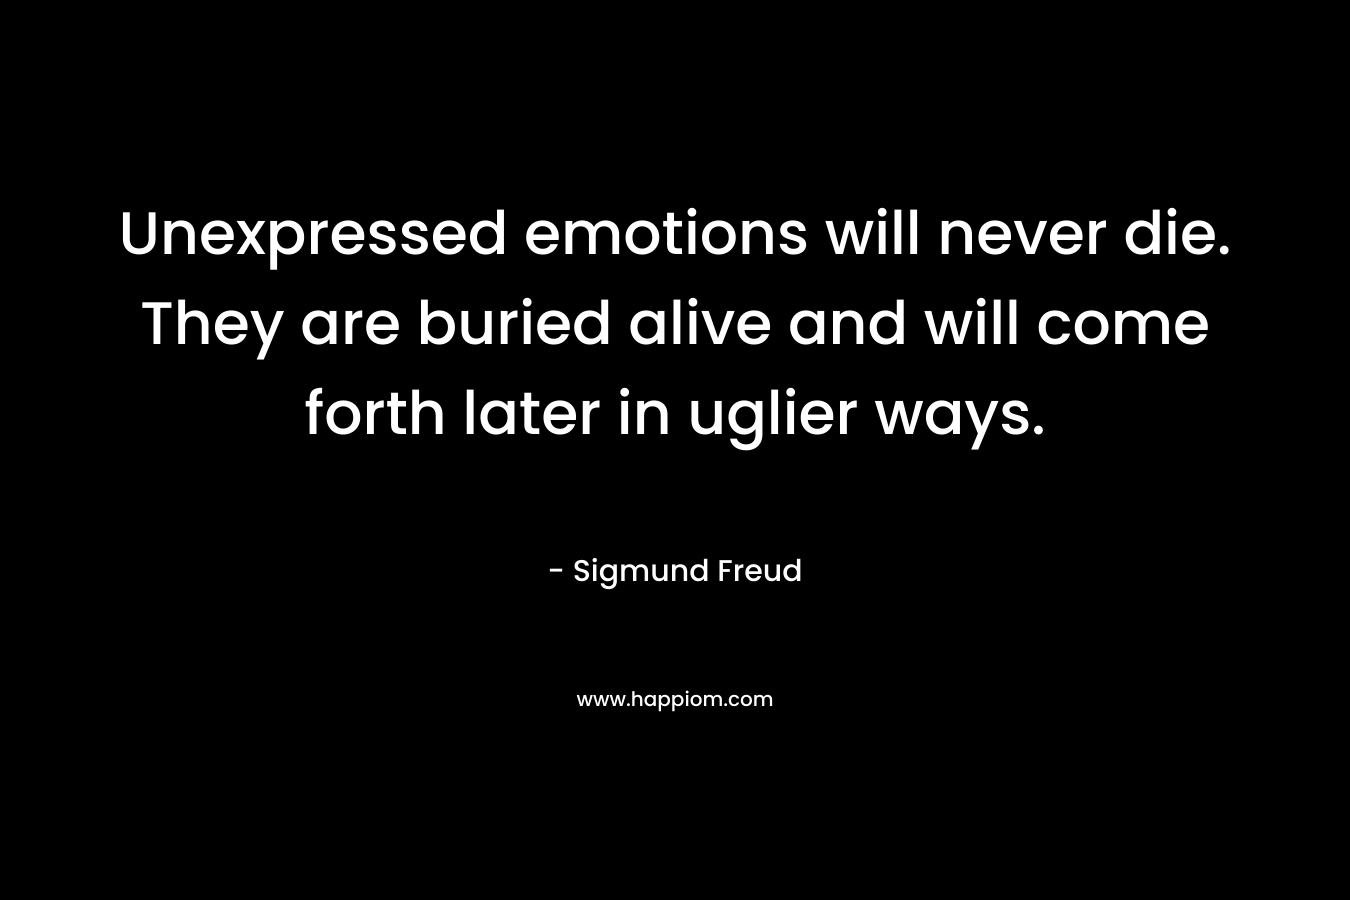 Unexpressed emotions will never die. They are buried alive and will come forth later in uglier ways. – Sigmund Freud